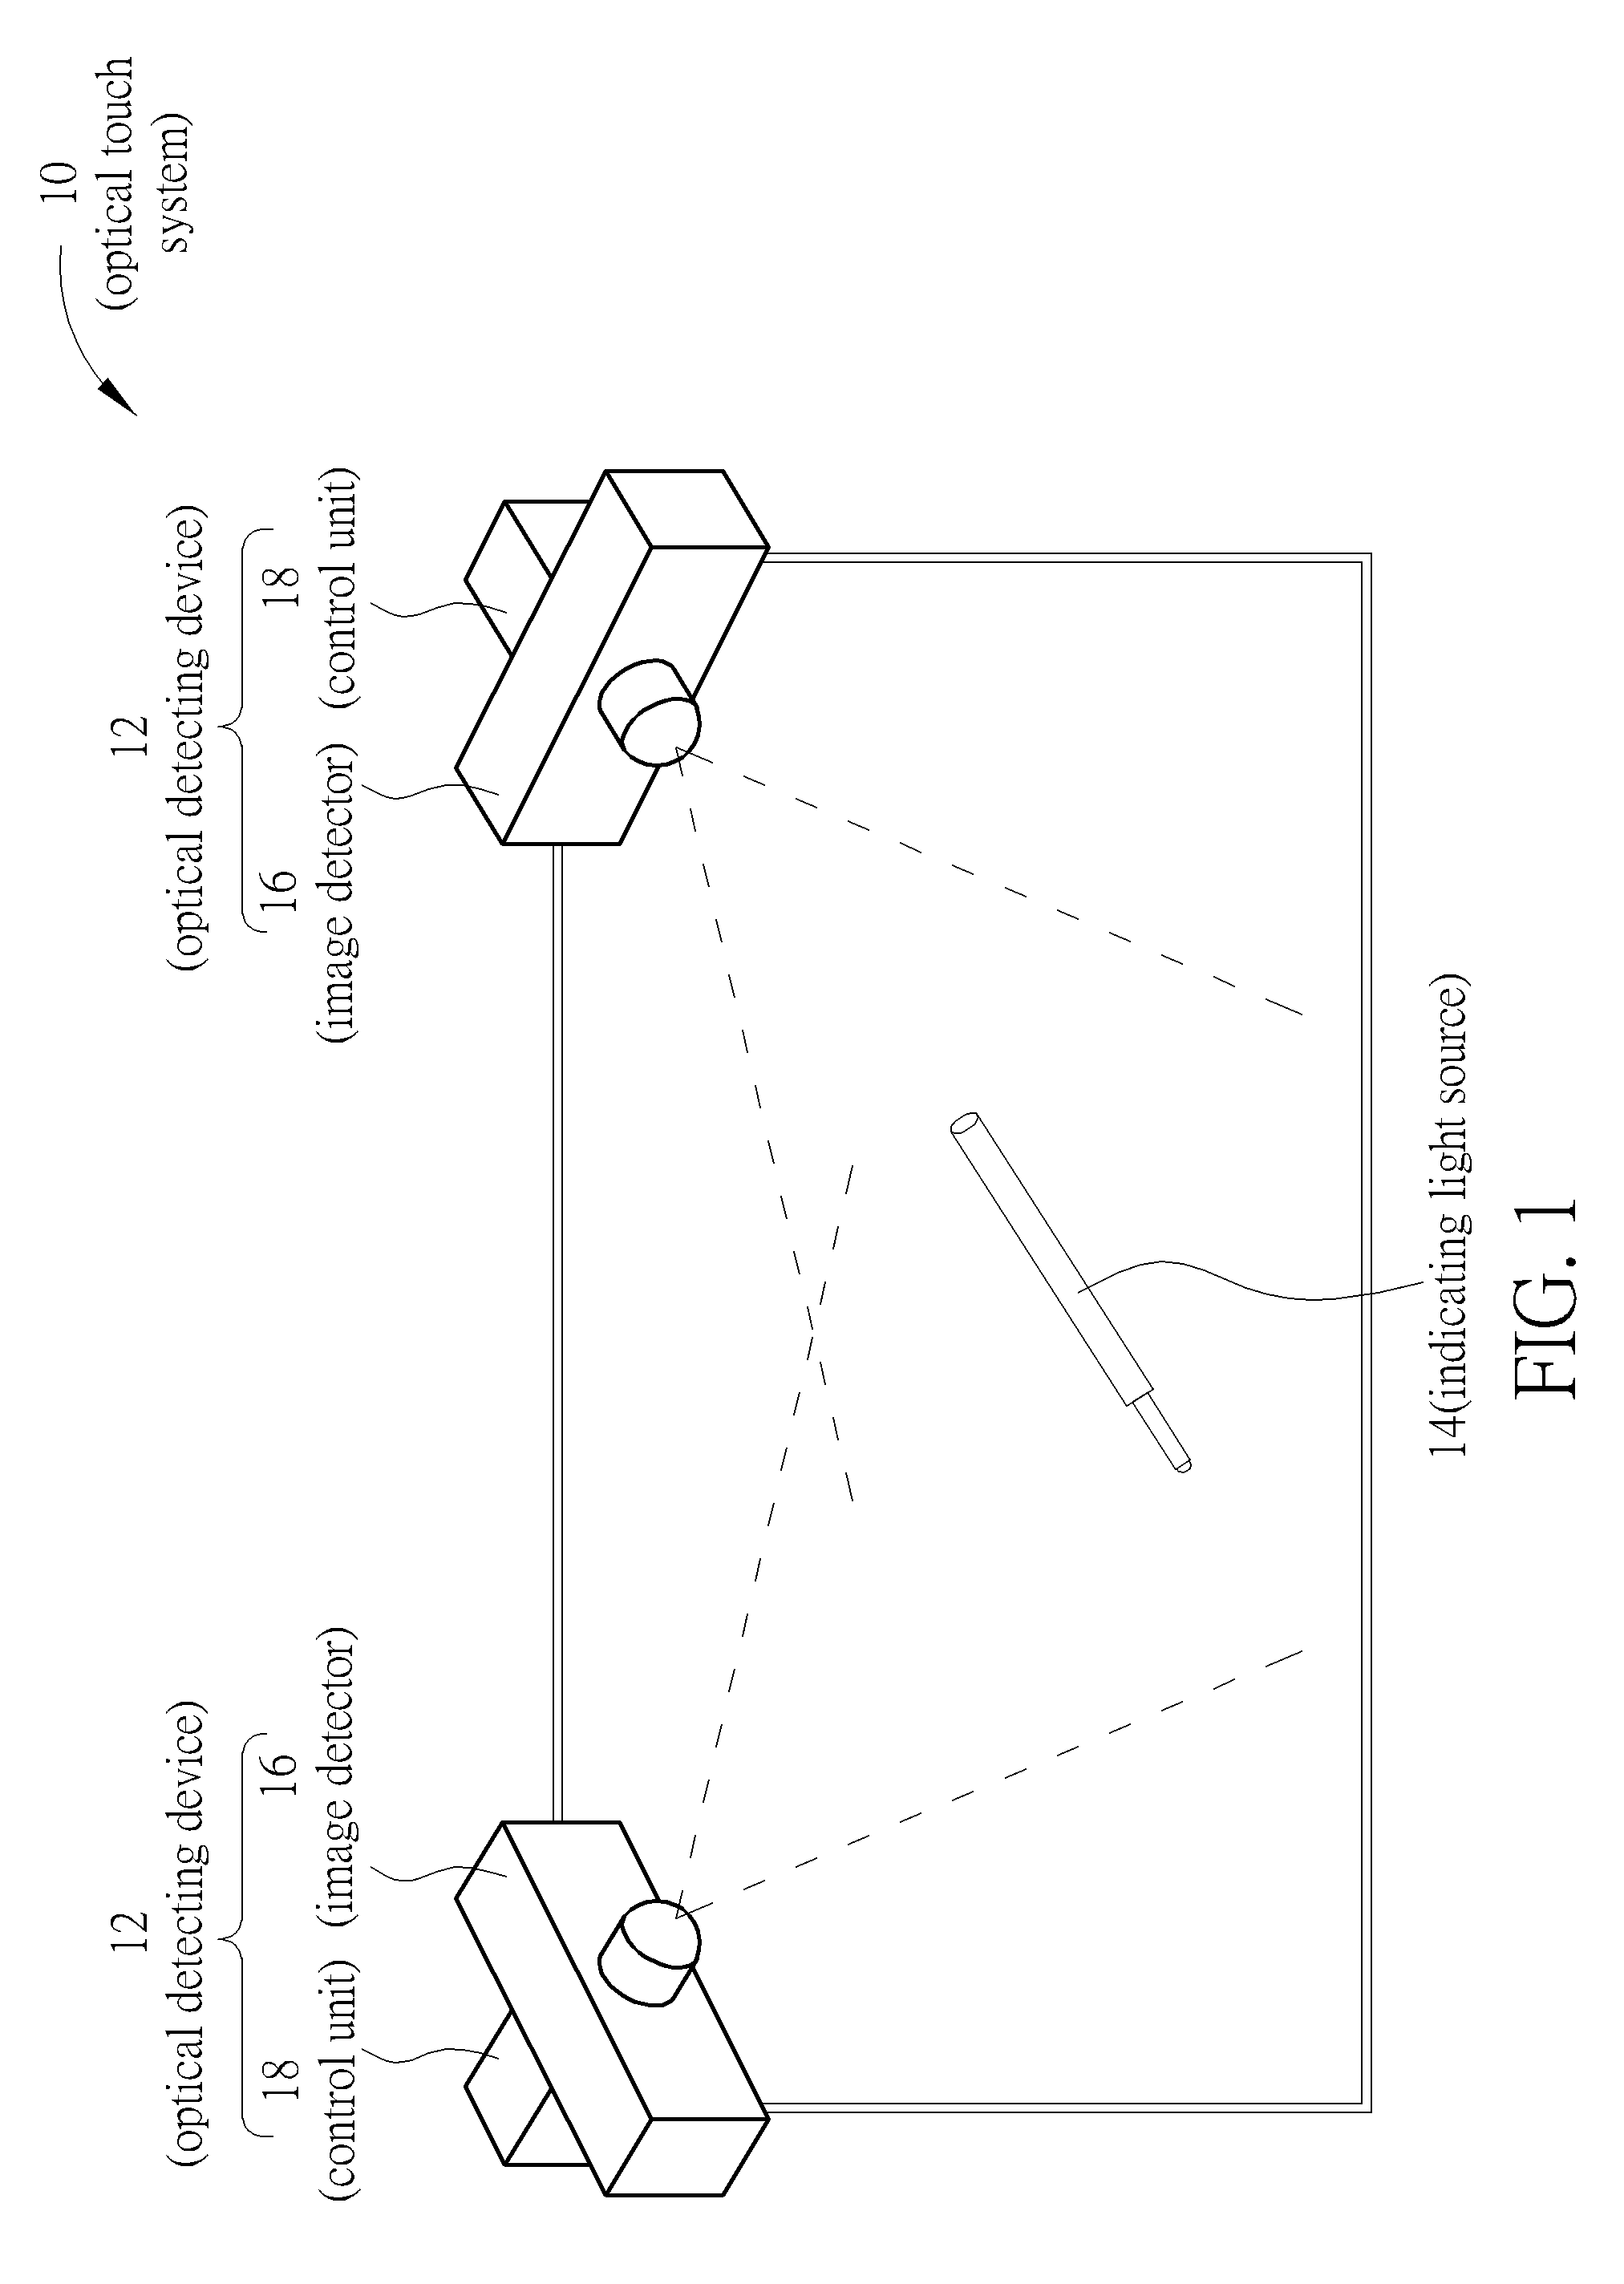 Optical detecting device and related method of synchronization adjustment